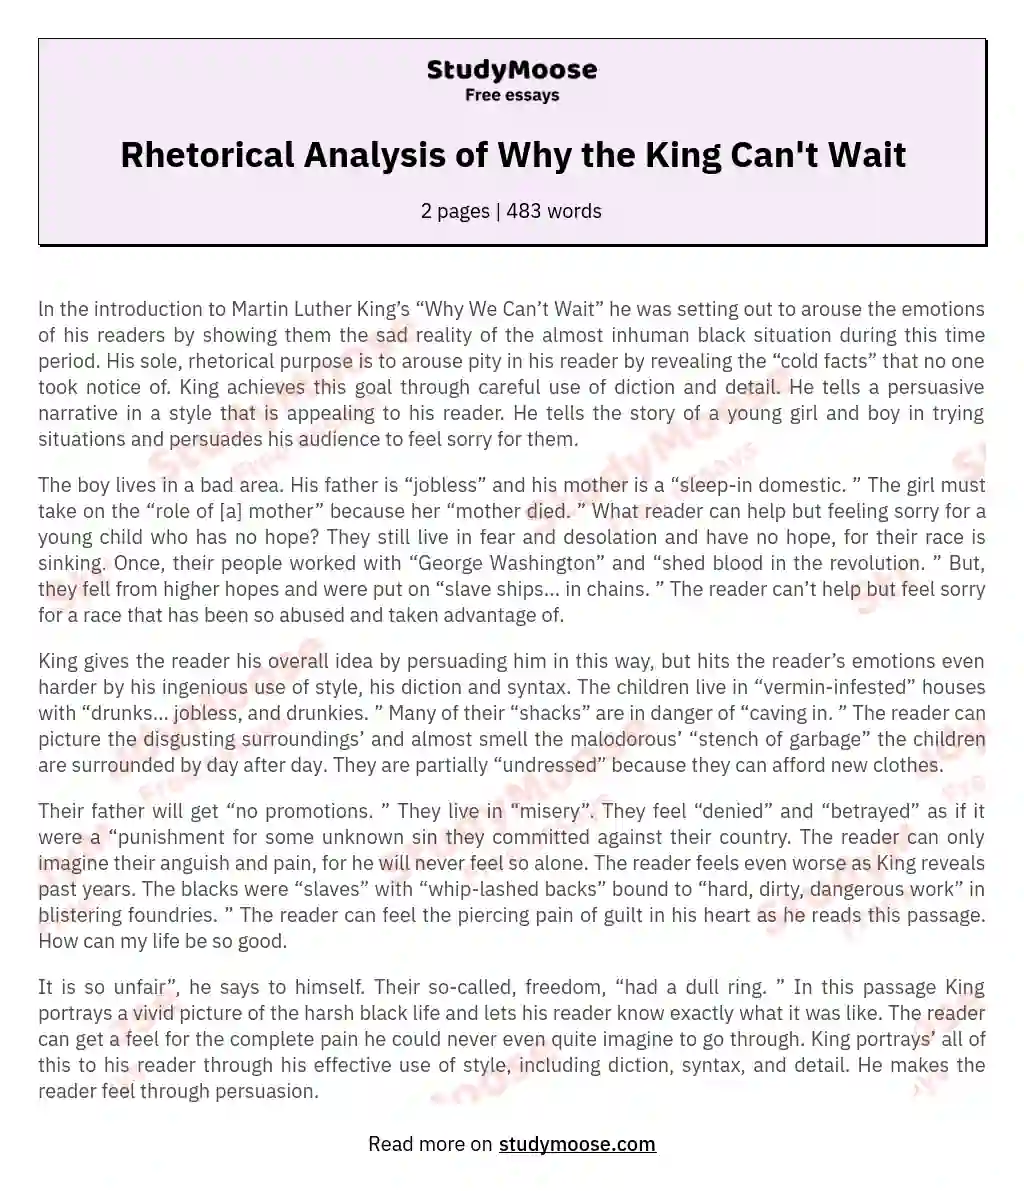 Rhetorical Analysis of Why the King Can't Wait essay